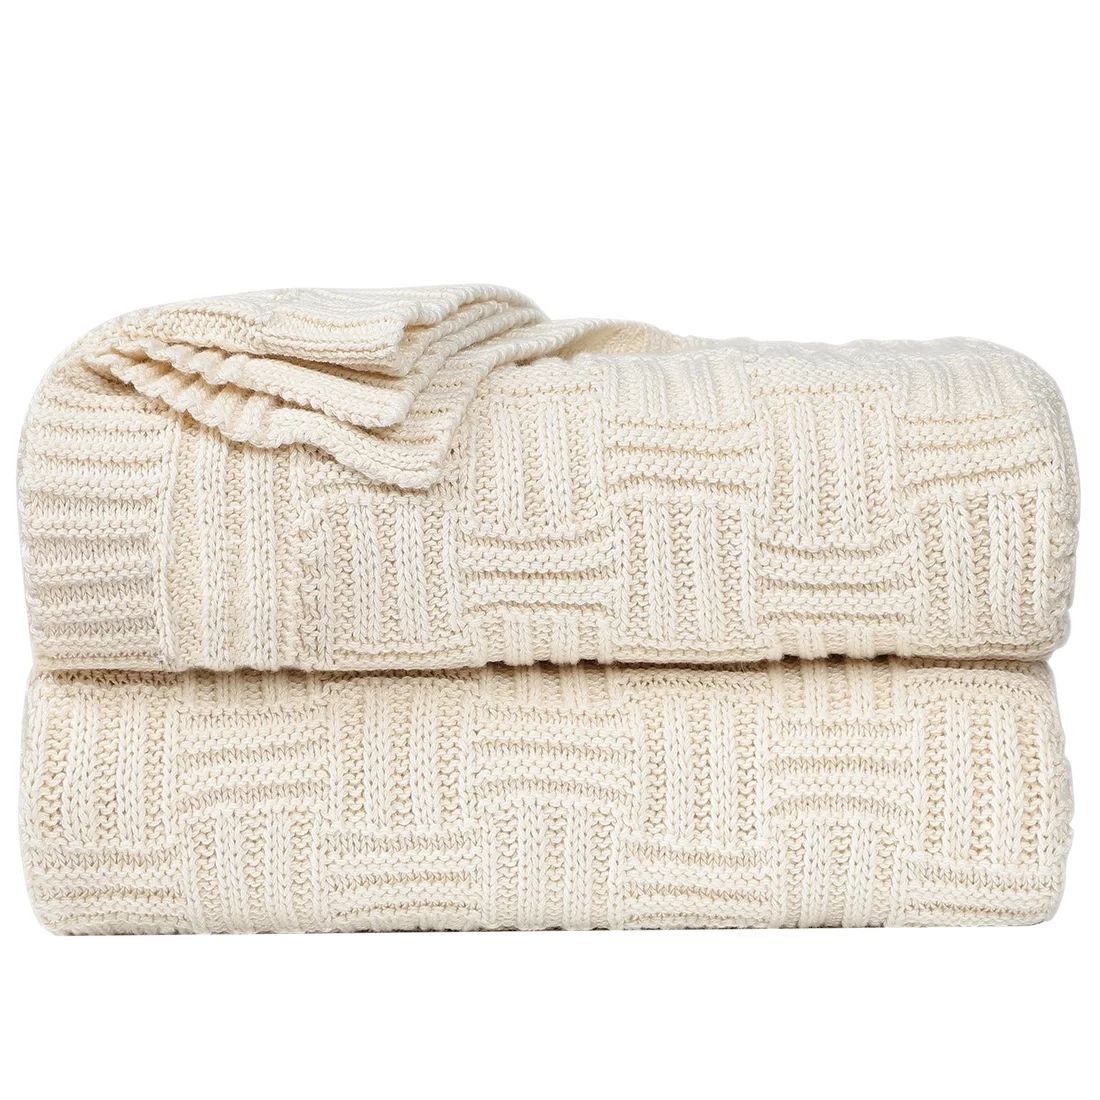 Unique Bargains Cotton Knitted Decorative Throw Blanket for Couch, Beige | Walmart (US)